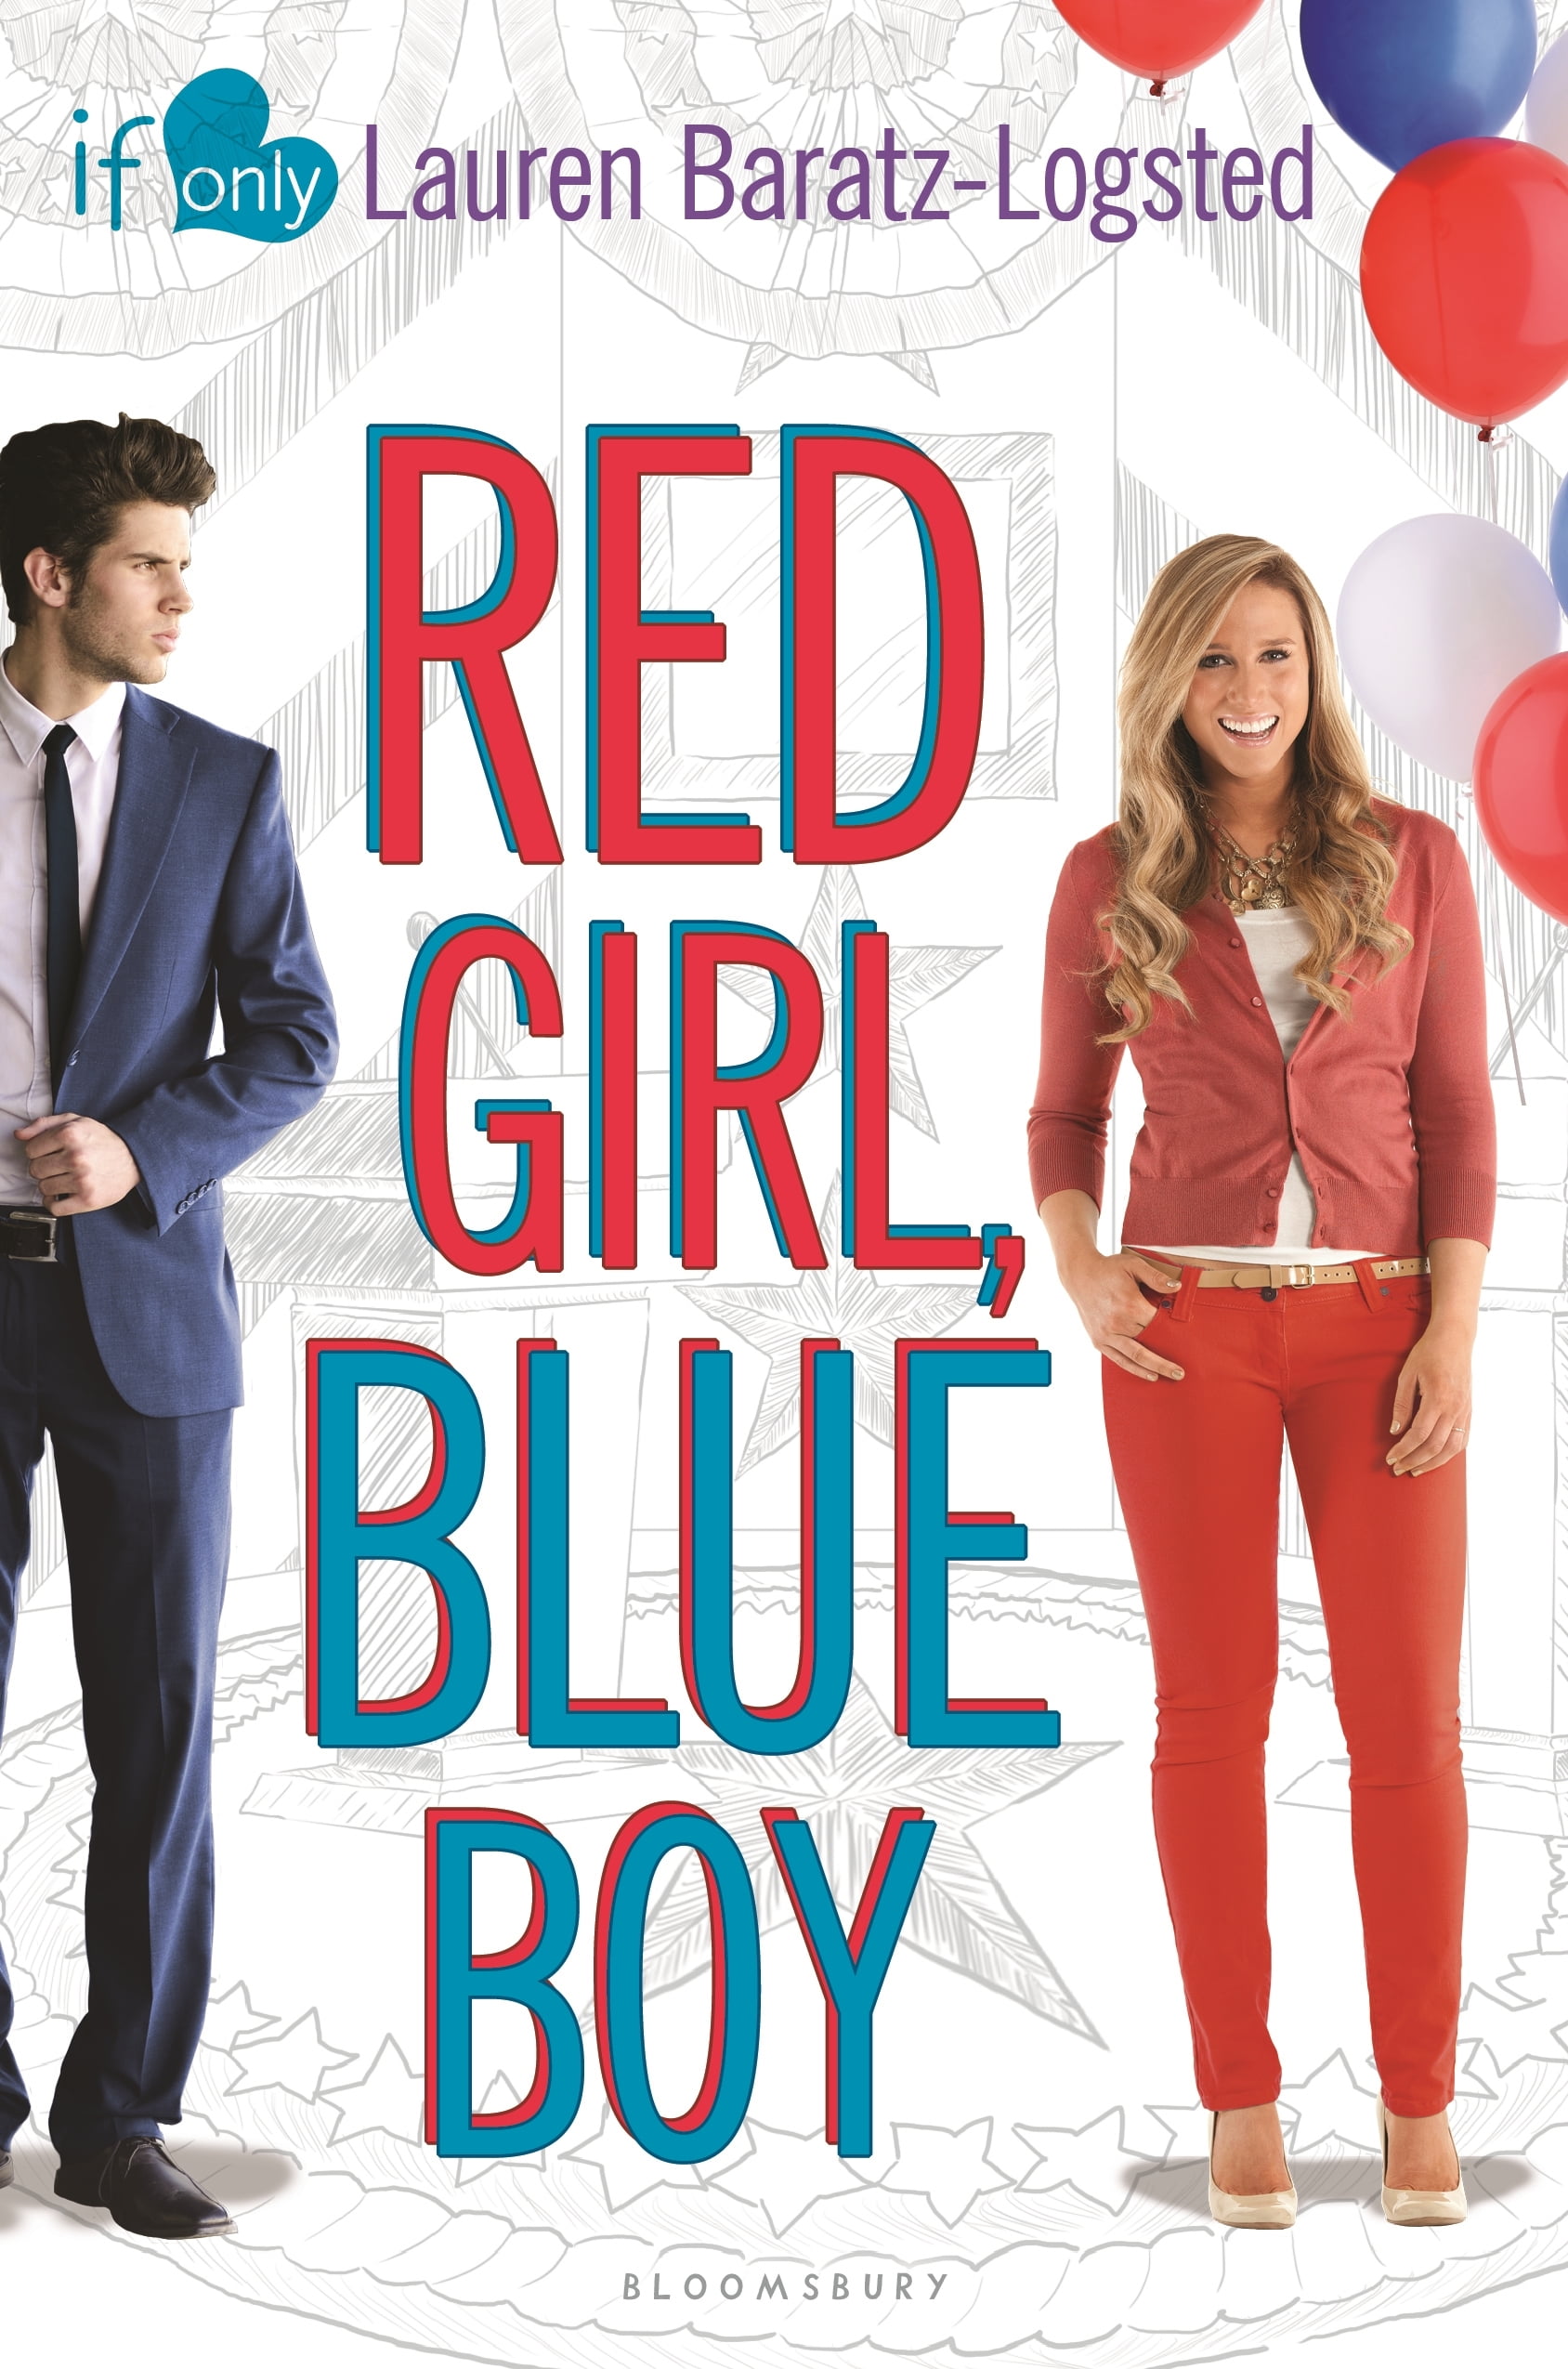 Only novel. Red boy and Blue girl. The girl in Red книга. Две девочки в синем книга. Boy in Blue группа girl in Red.